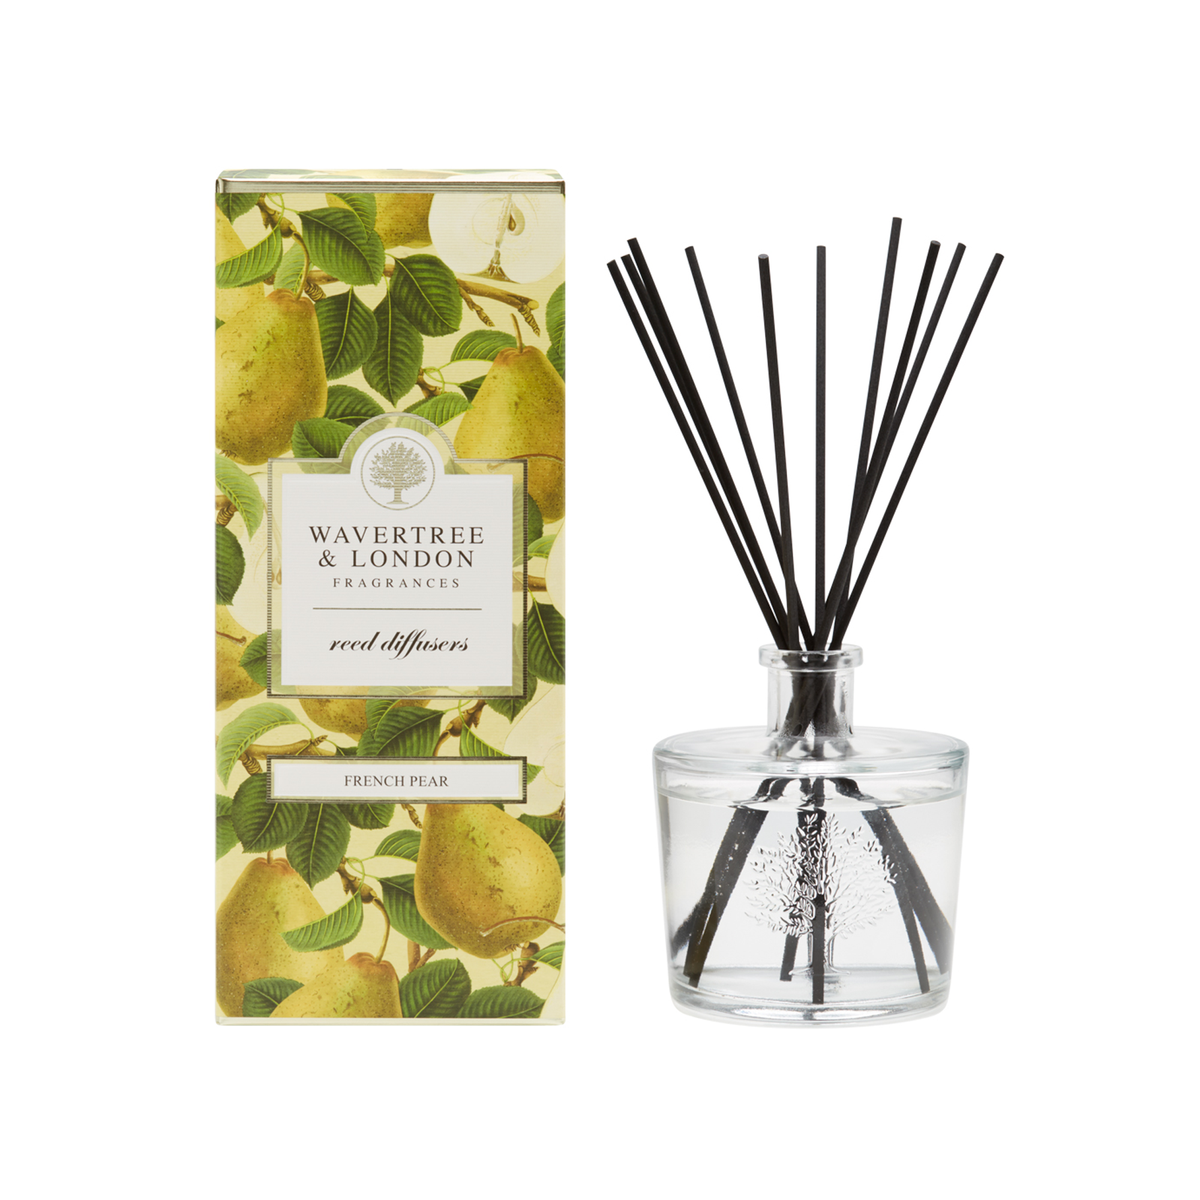 Wavertree & London "French Pear" Fragrance Diffuser